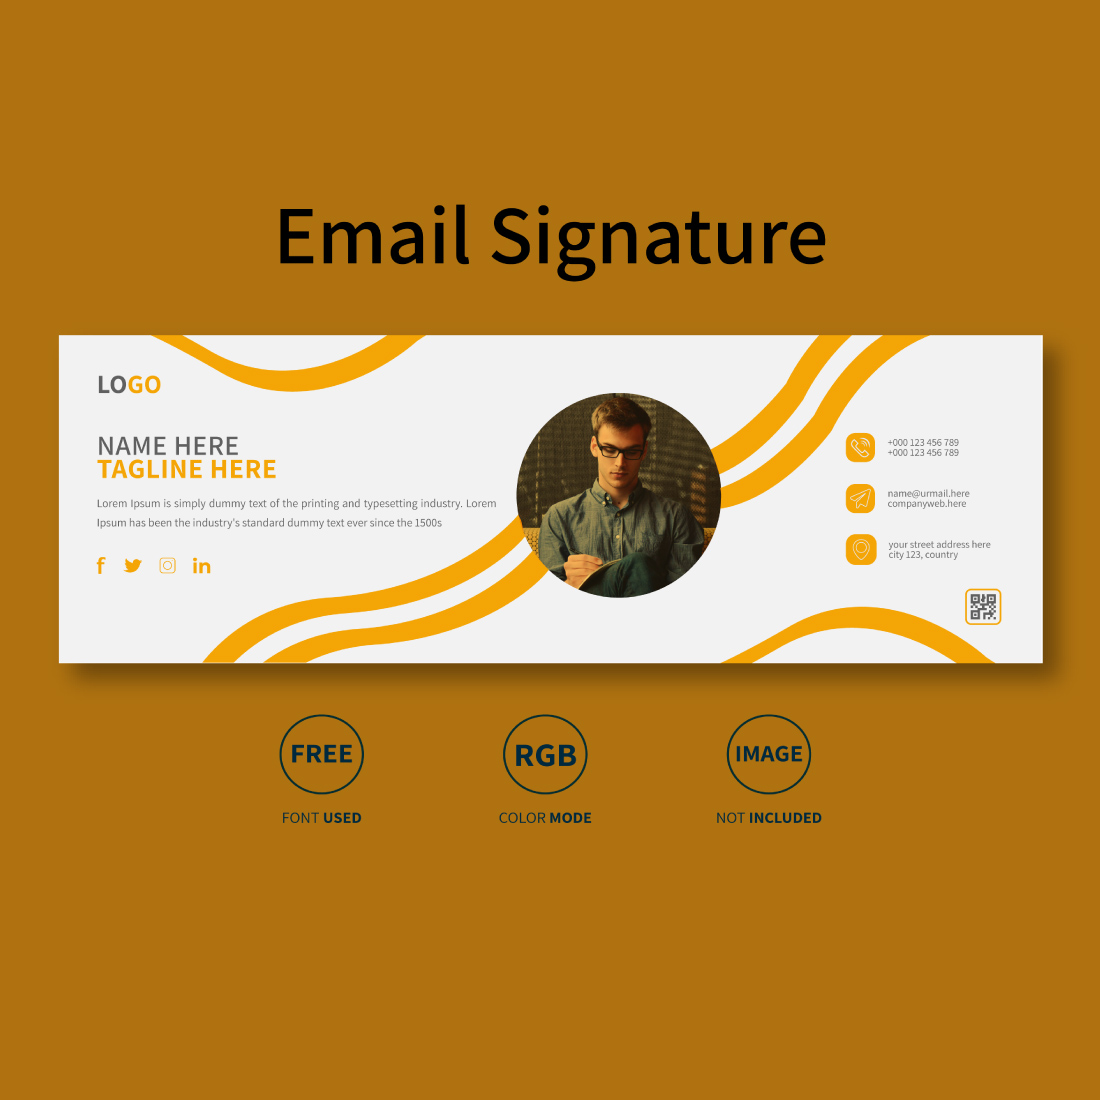 Email signature design or email footer design and personal Facebook cover design template cover image.